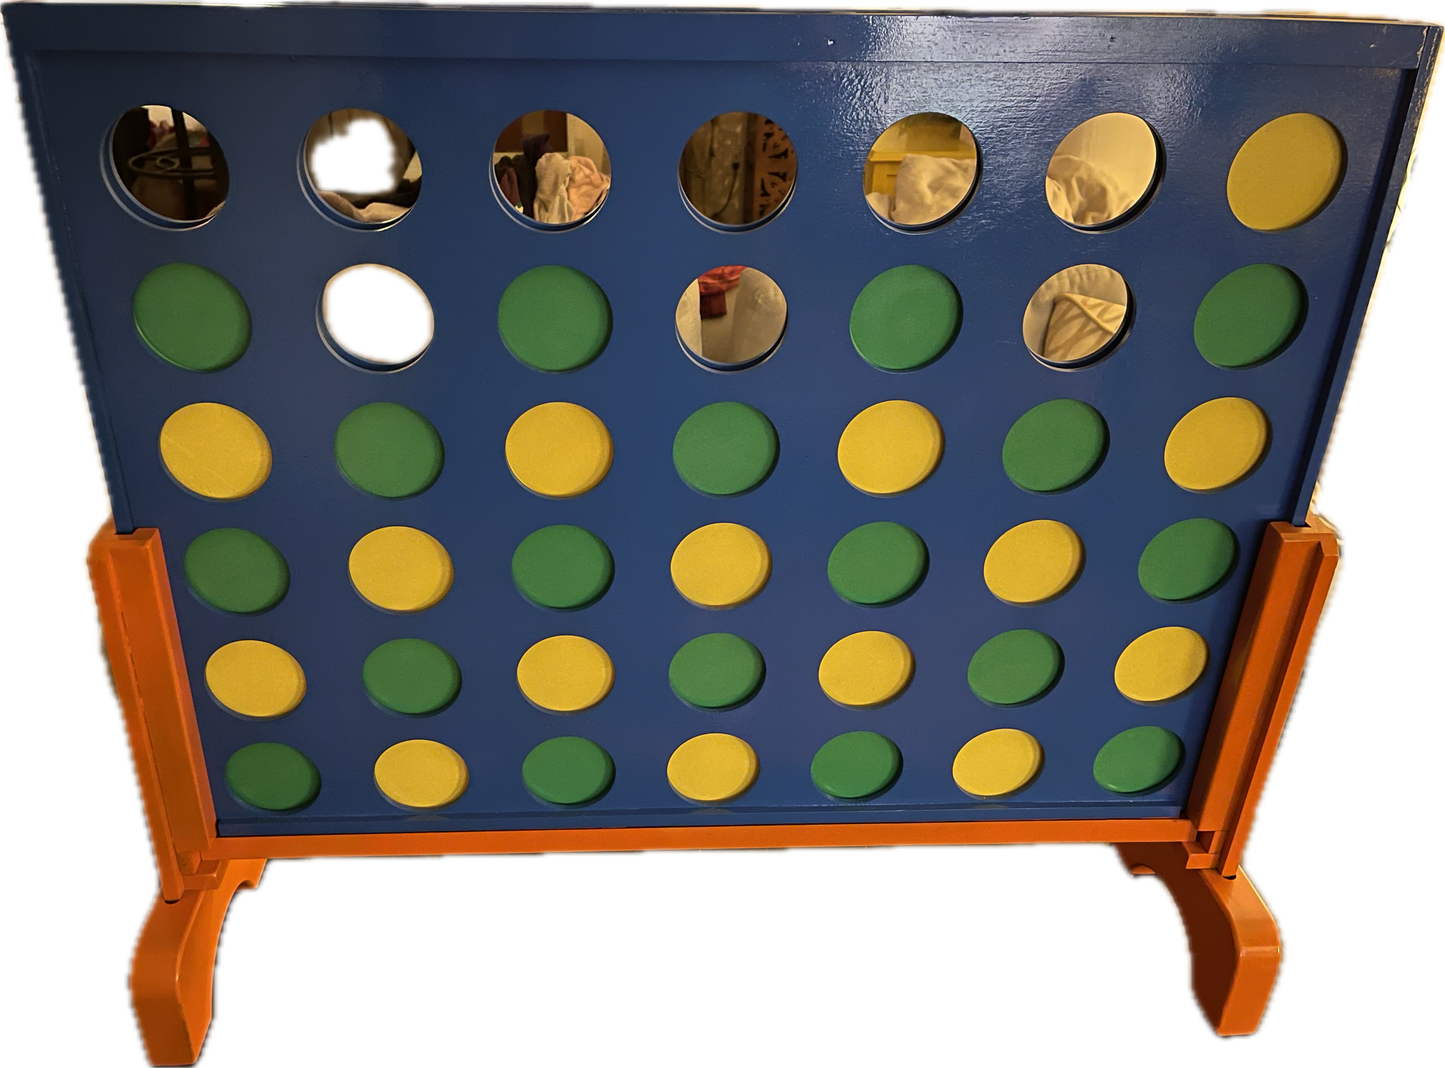 JUMBO GIANT CONNECT FOUR IN A ROW LAWN GAME WOOD 4FT X 4FT